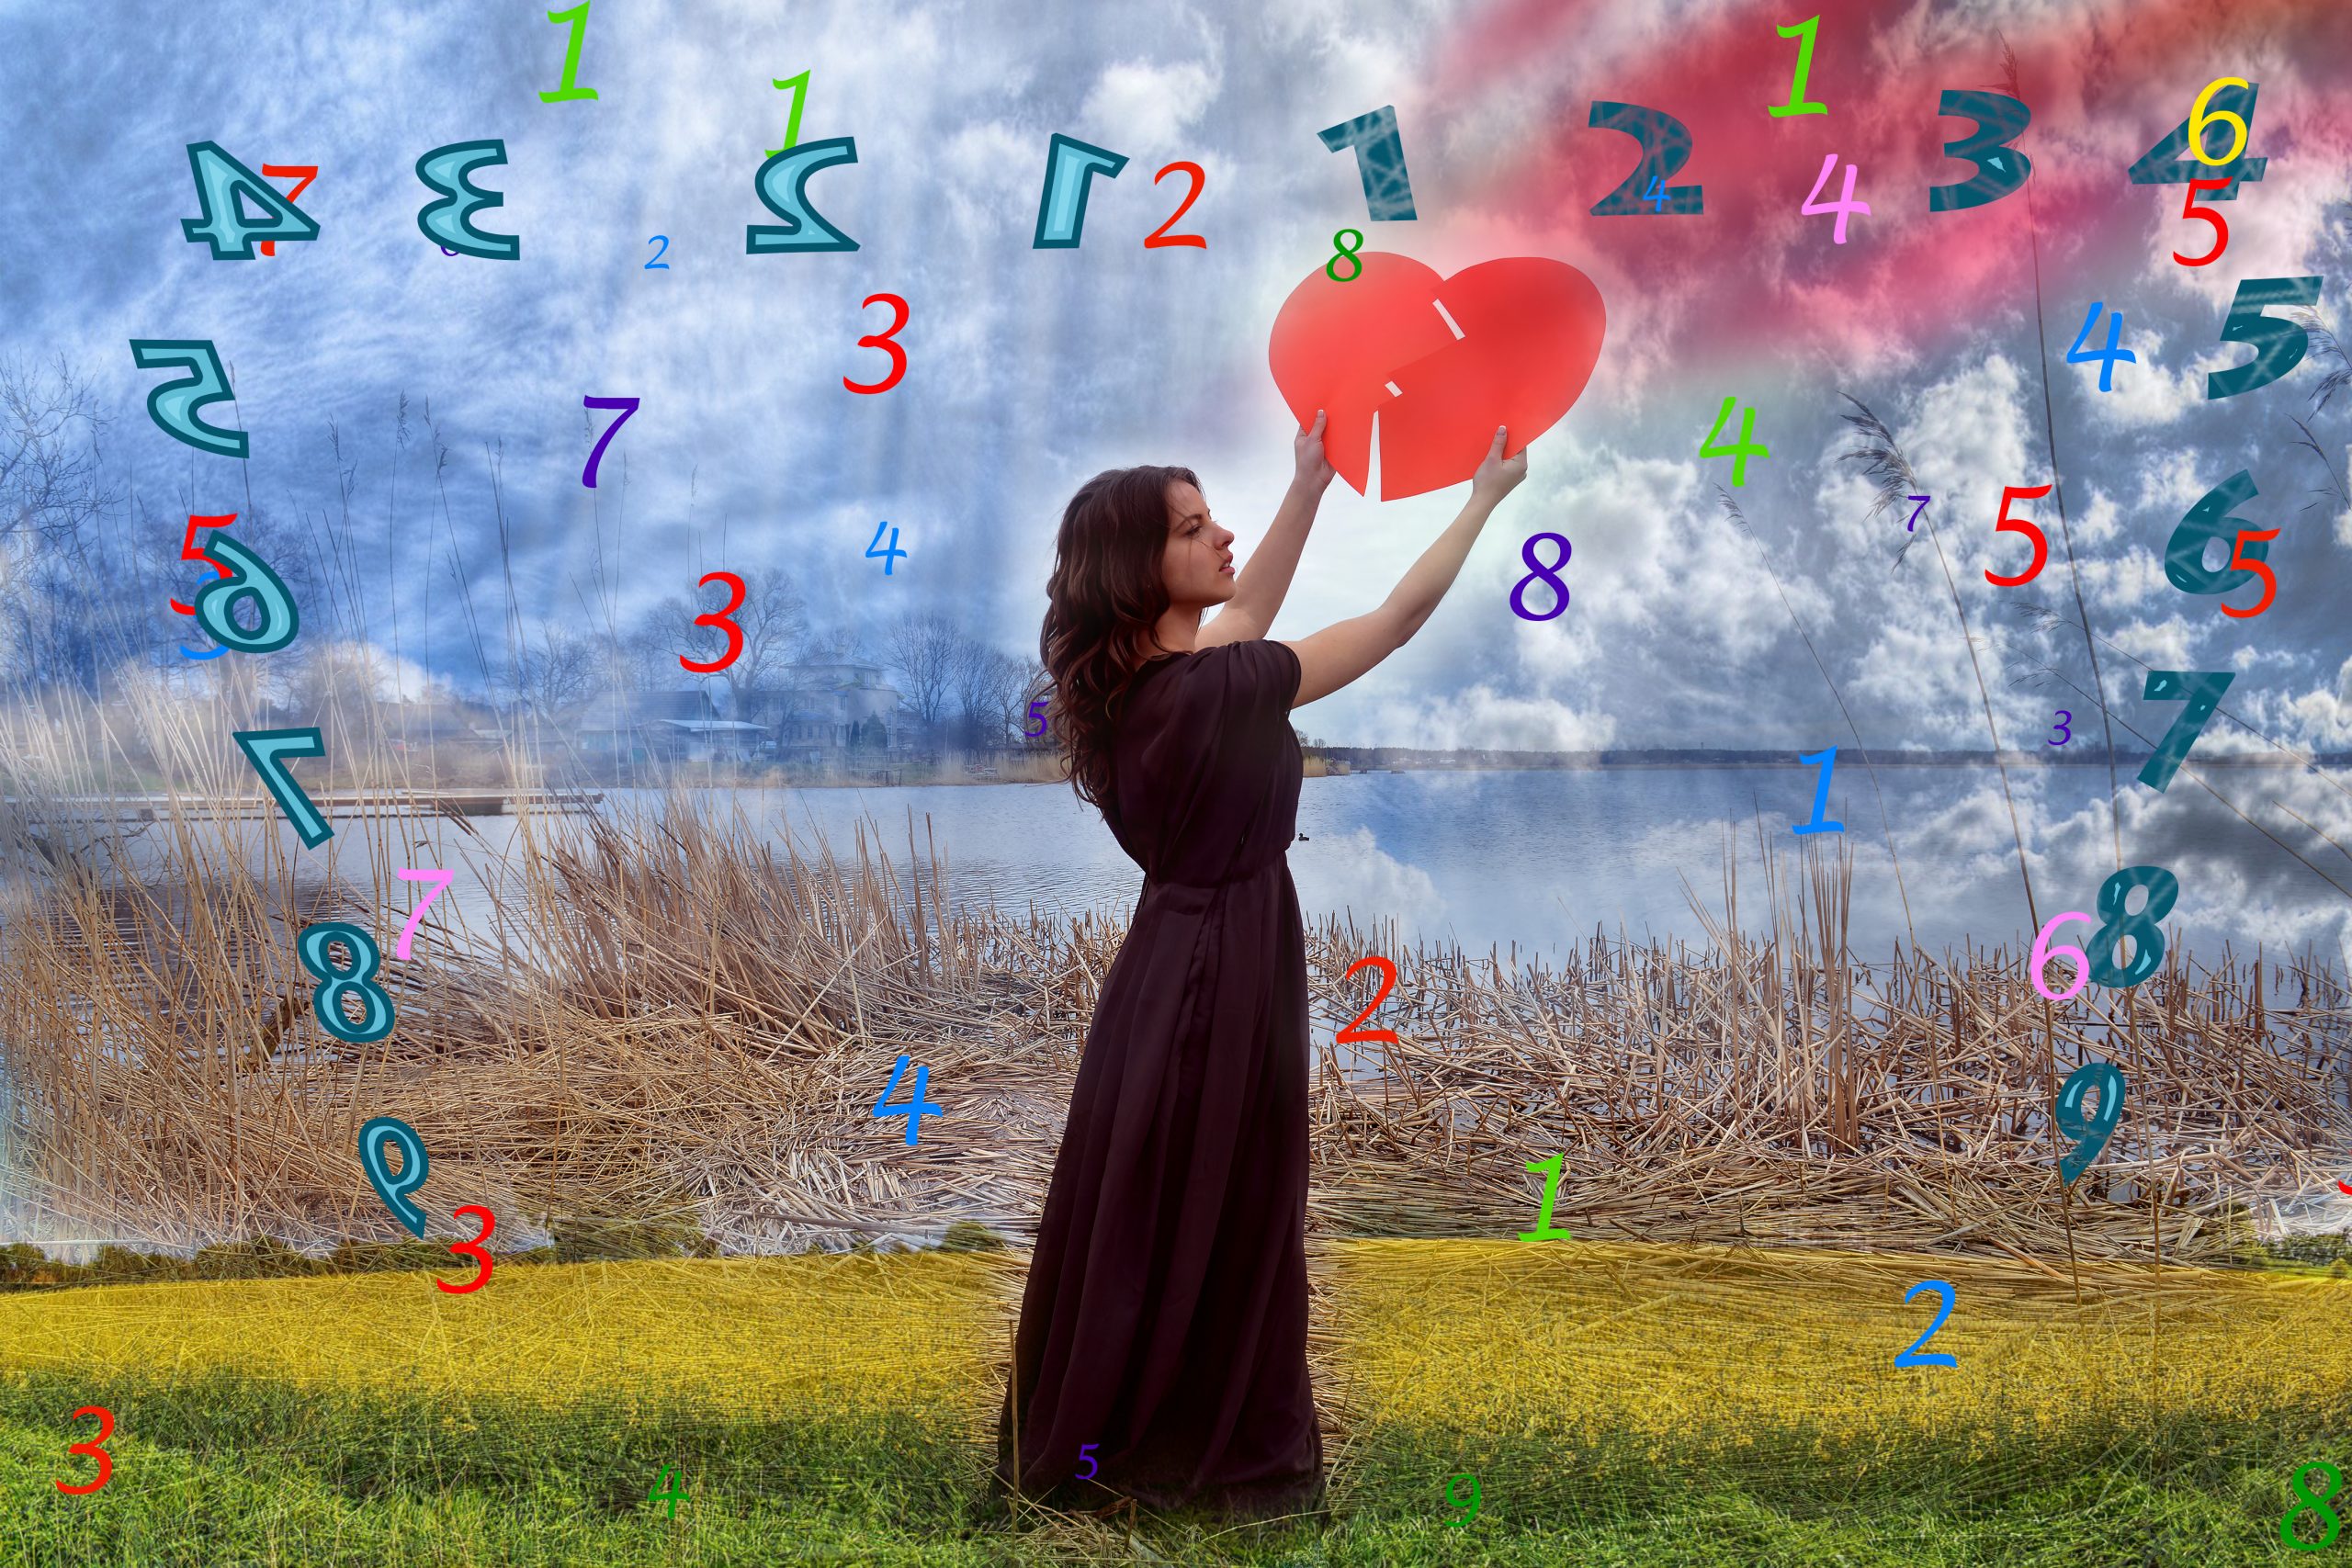 Numerology as a Tool for Love